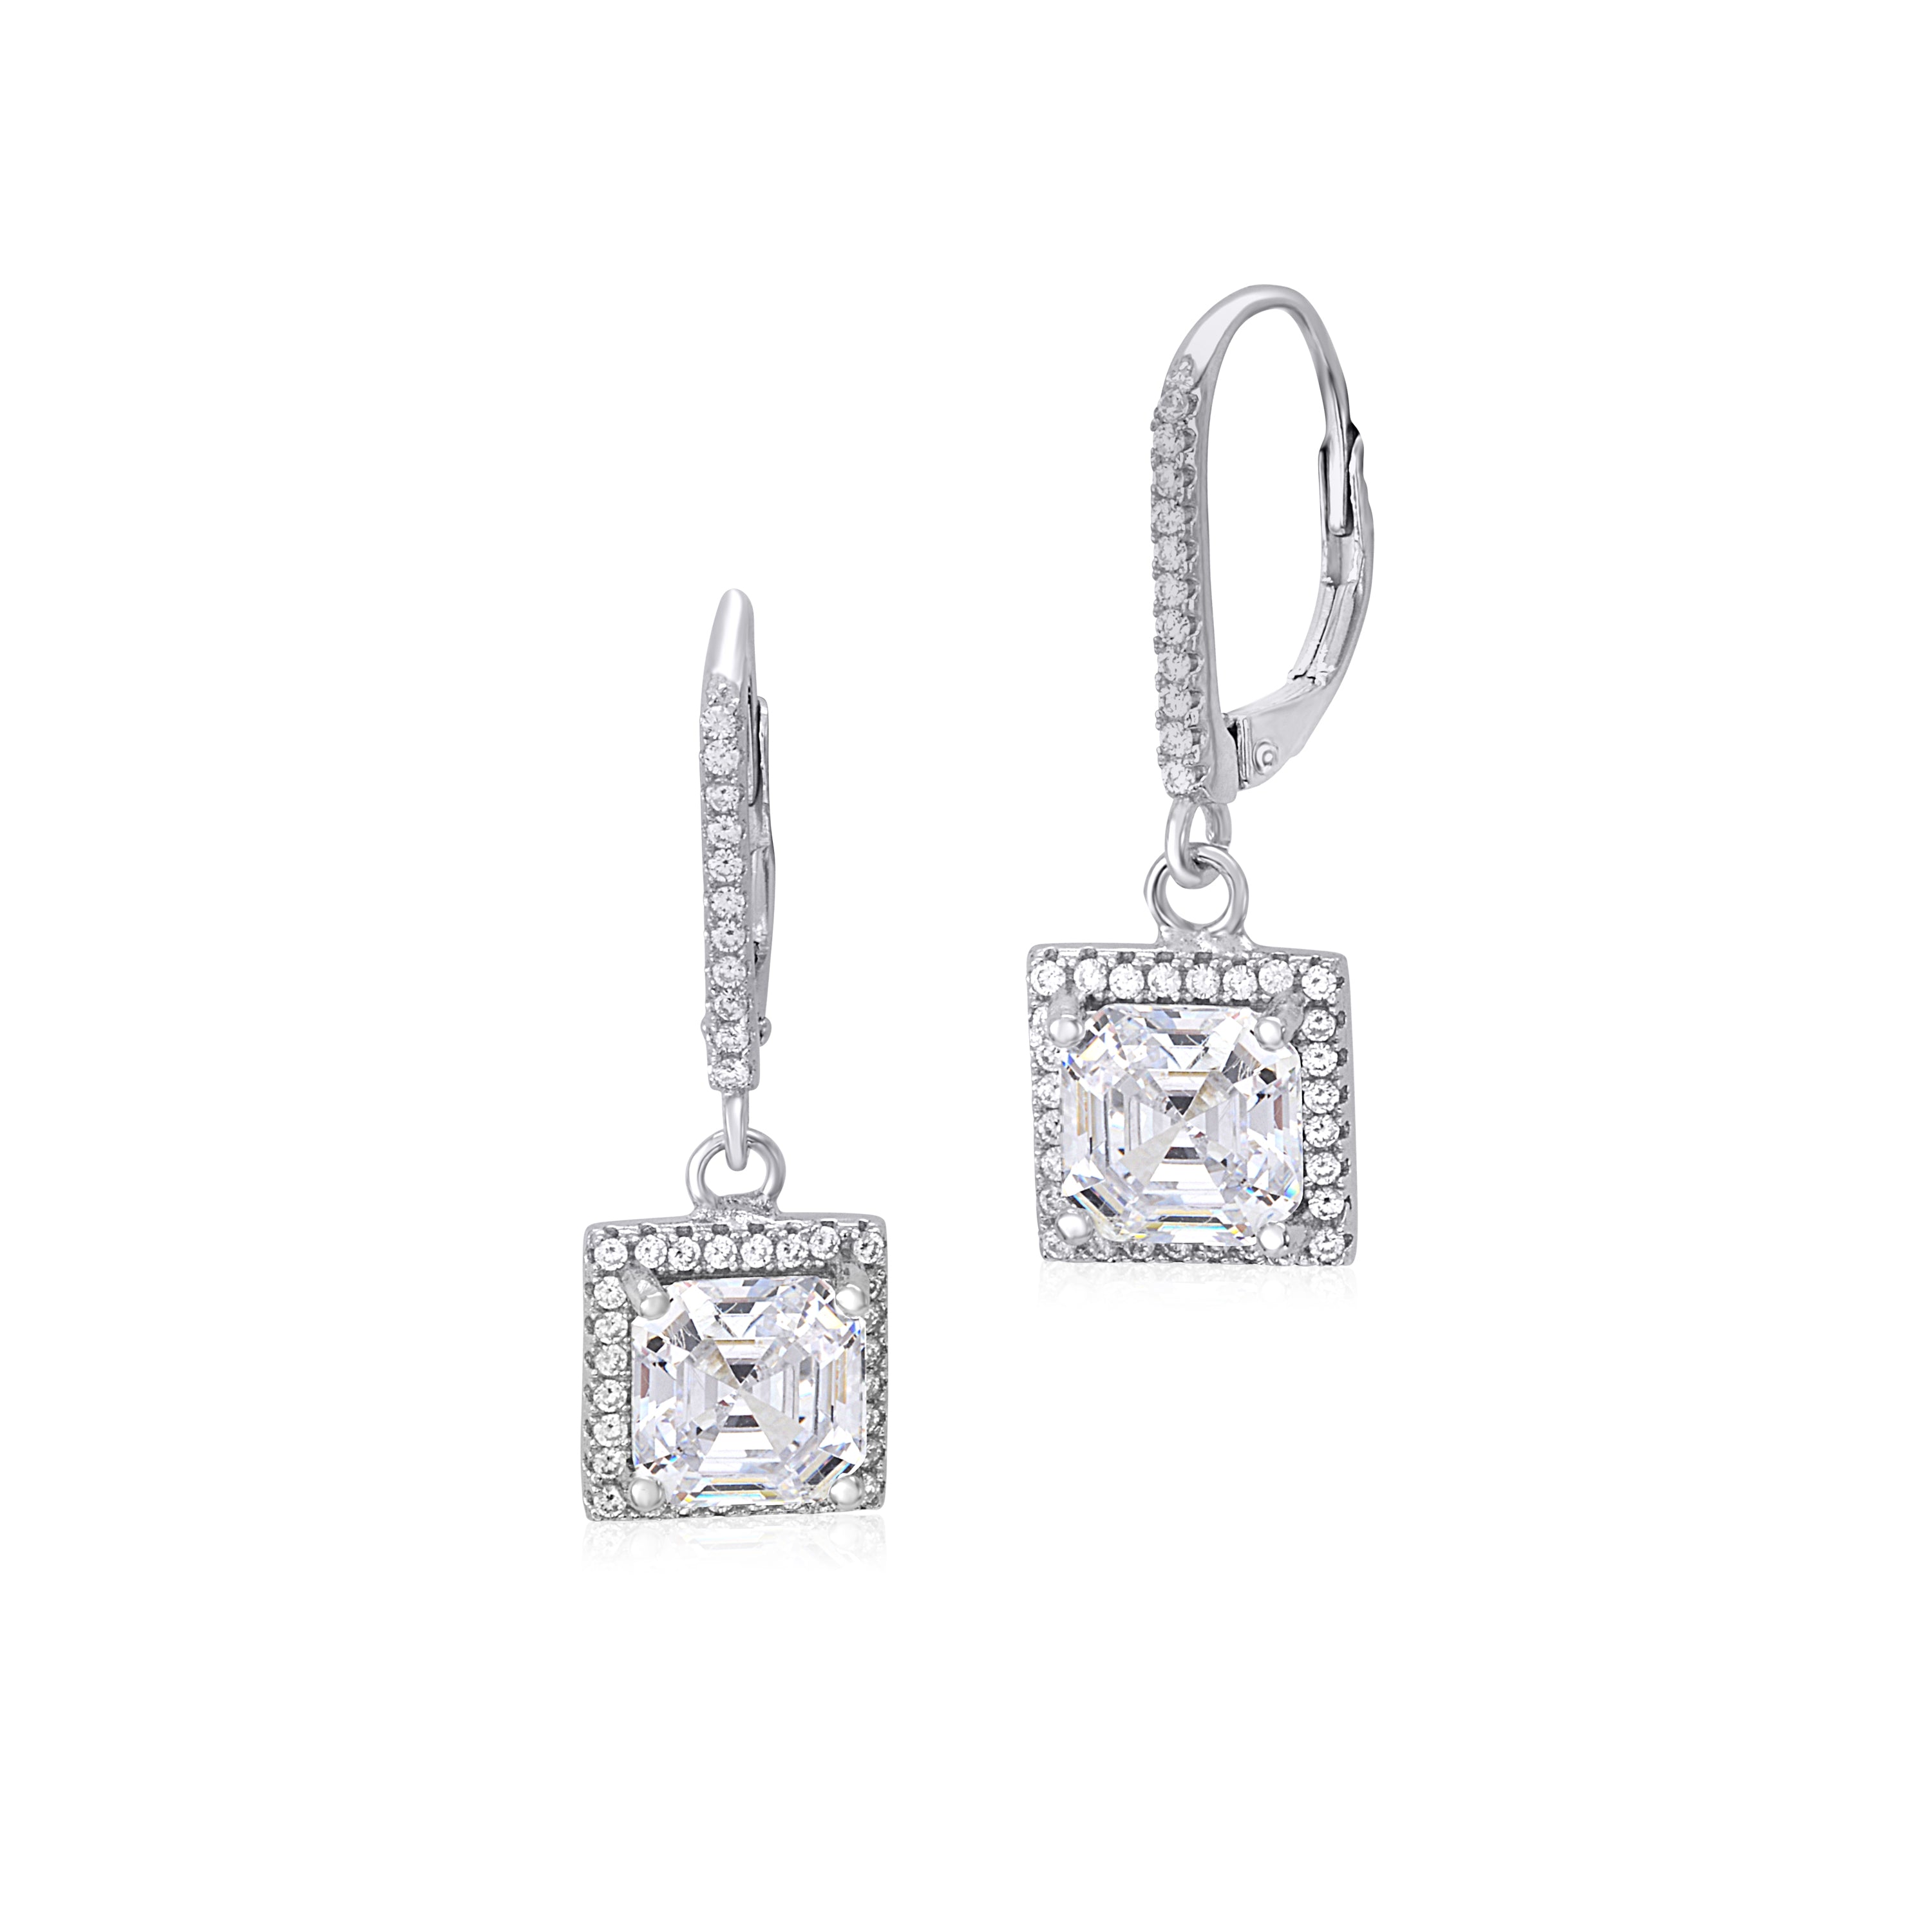 Sterling Silver 925 Simulated Diamond Square Asscher Cut Halo Leverback Earrings Dangle